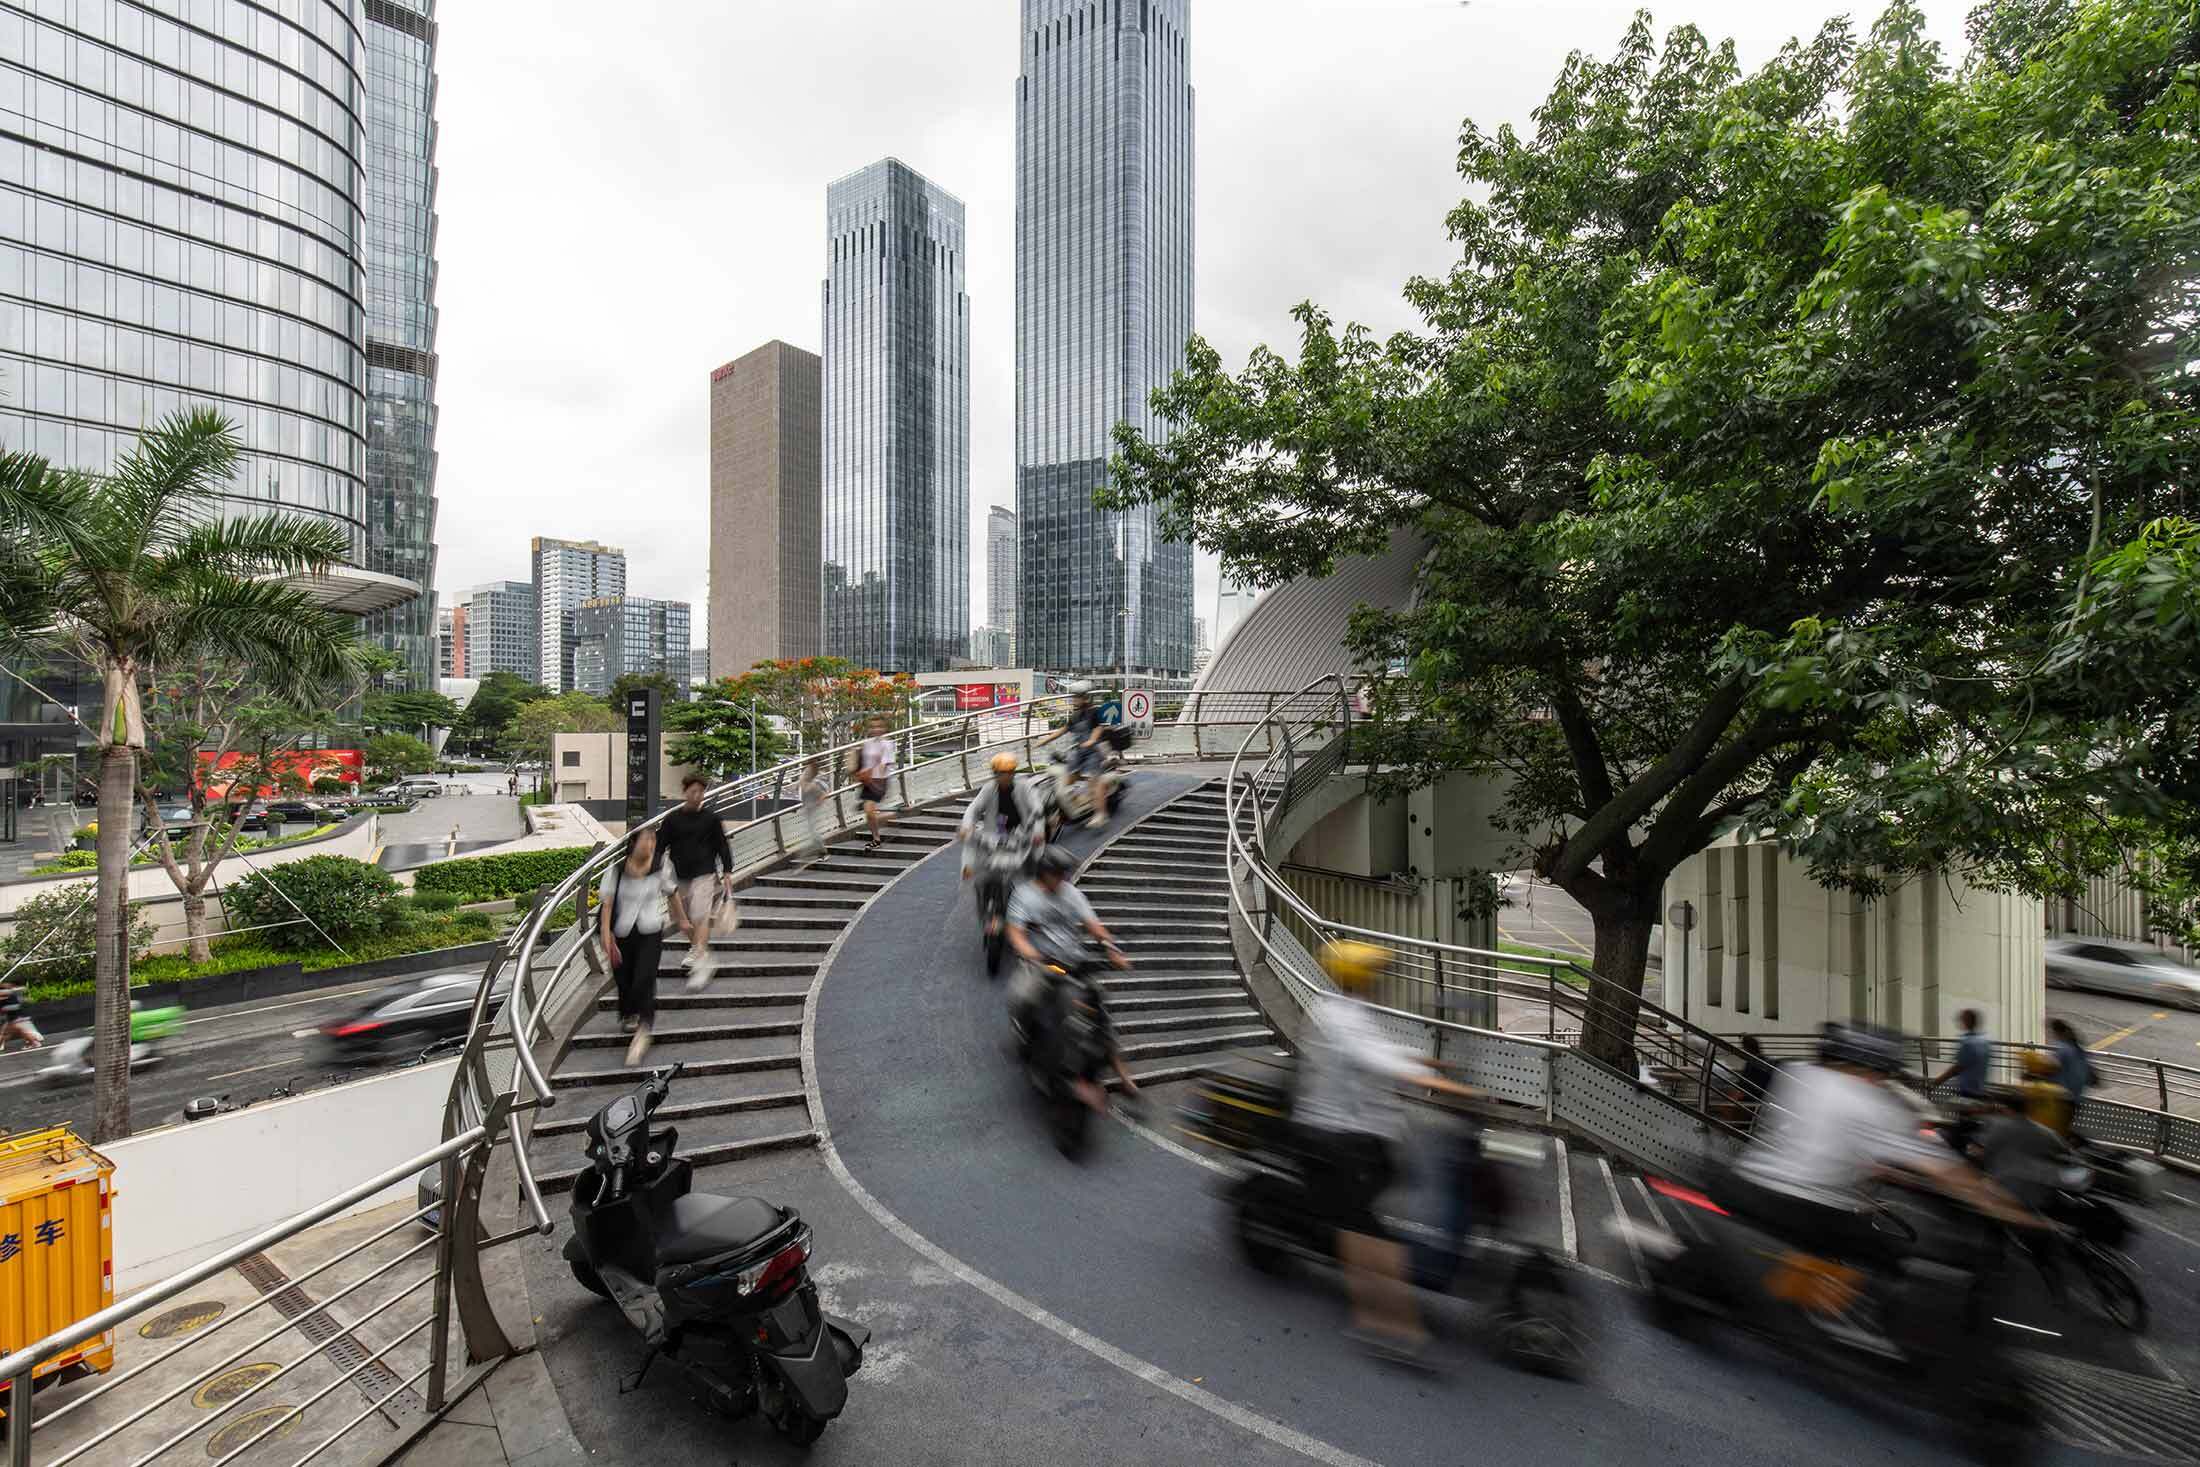 Pedestrians and cyclists at a bridge-crossing over a large highway in Shenzhen.